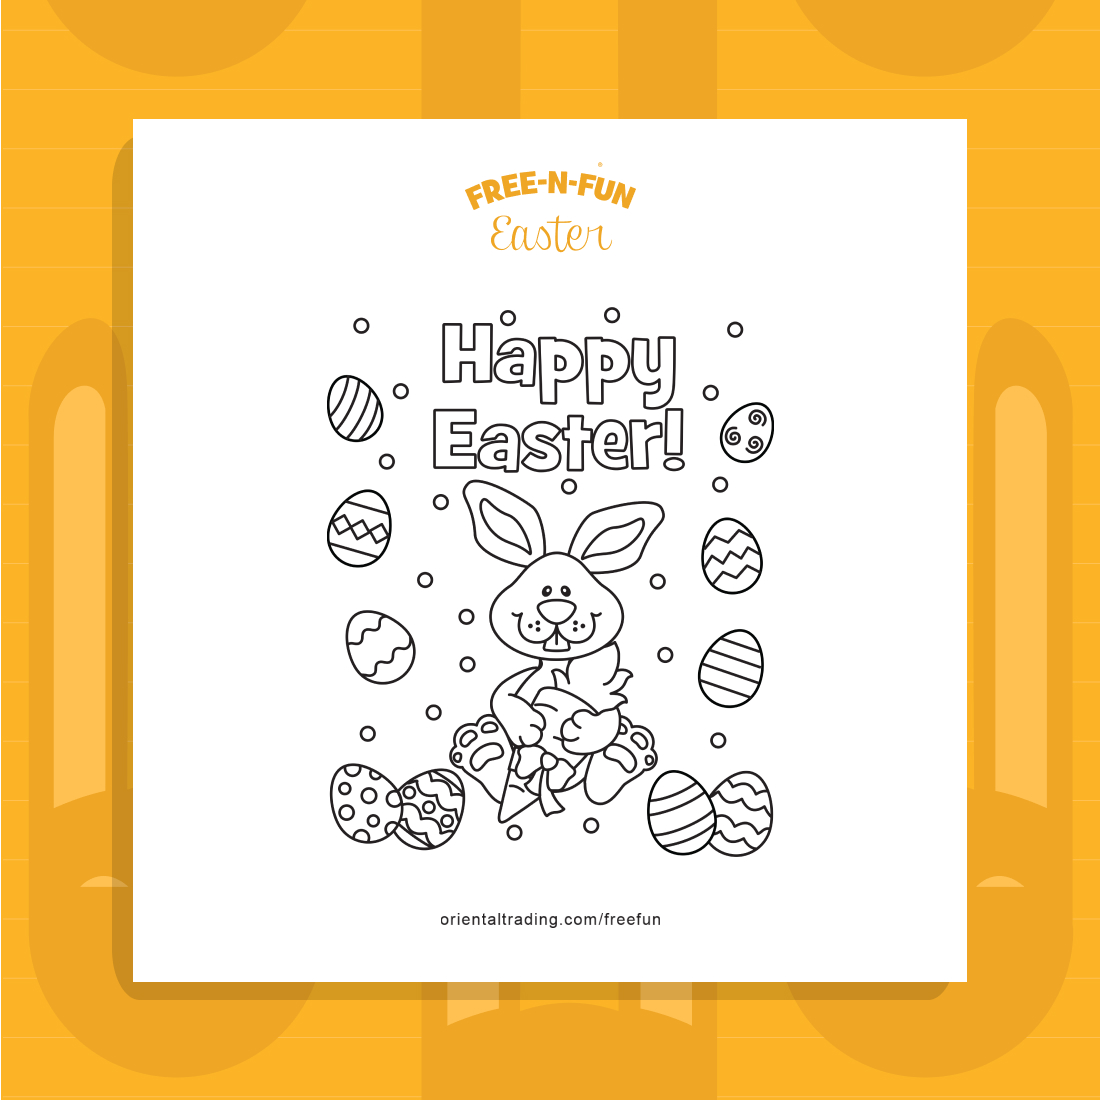 Happy Easter Eggs free easter printables preview image.